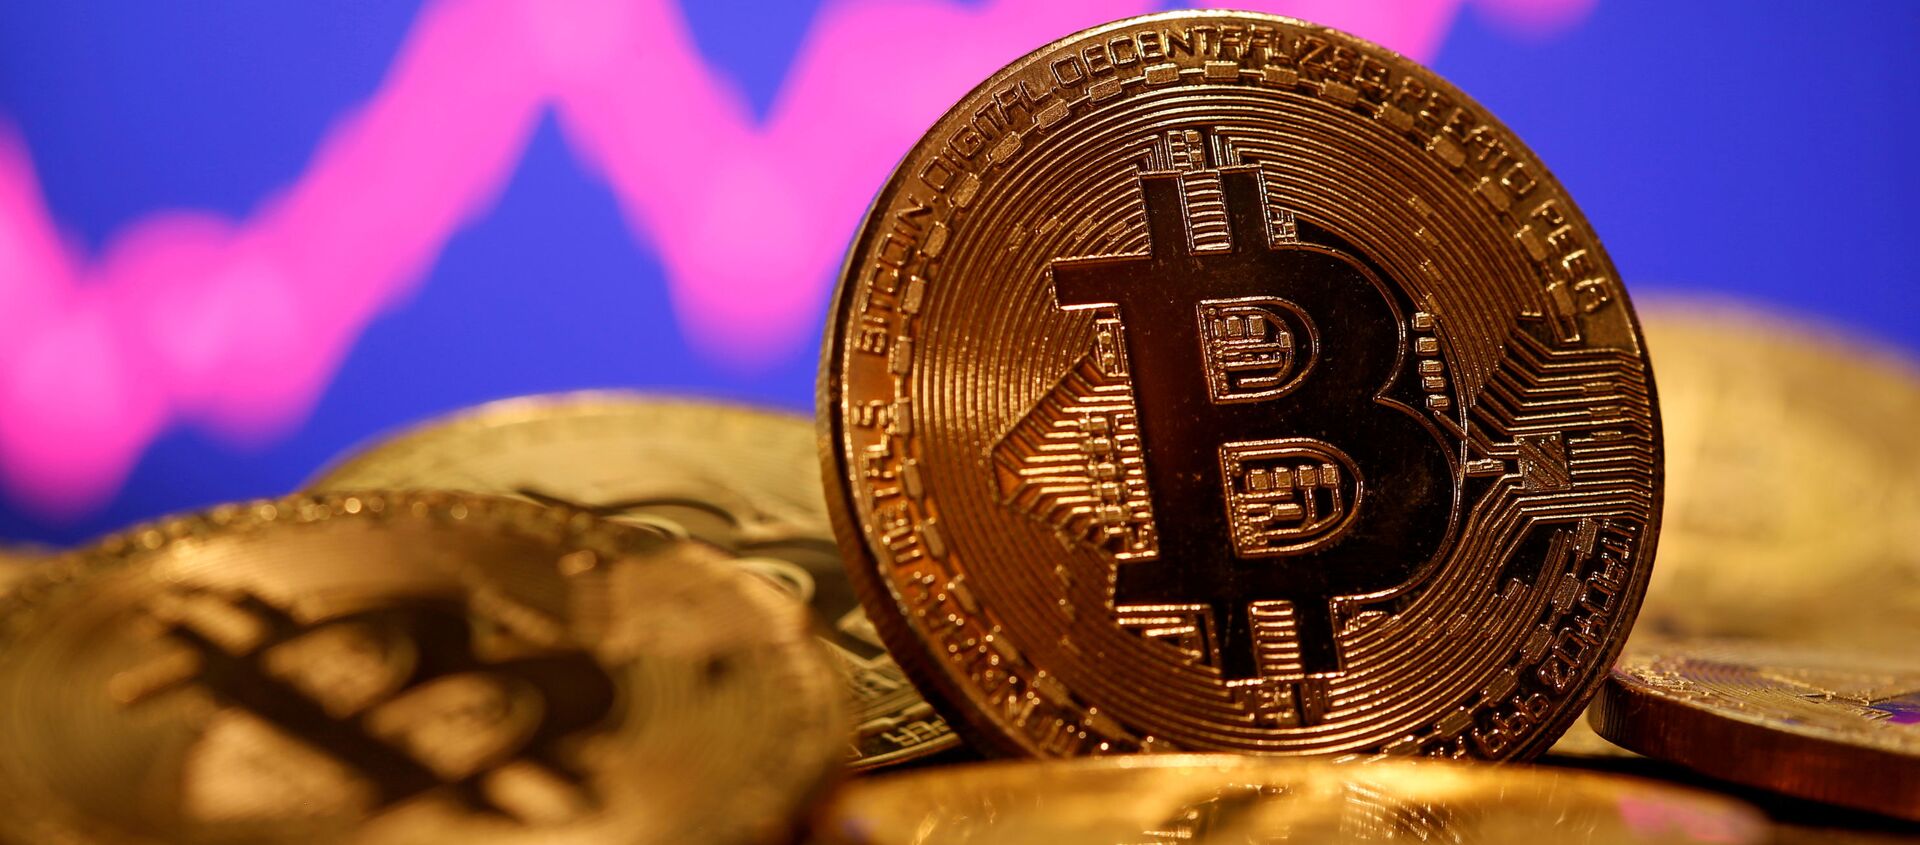 A representation of the virtual currency Bitcoin is seen in front of a stock graph in this illustration, taken 8 January 2021. REUTERS/Dado Ruvic/File Photo - Sputnik International, 1920, 17.02.2021